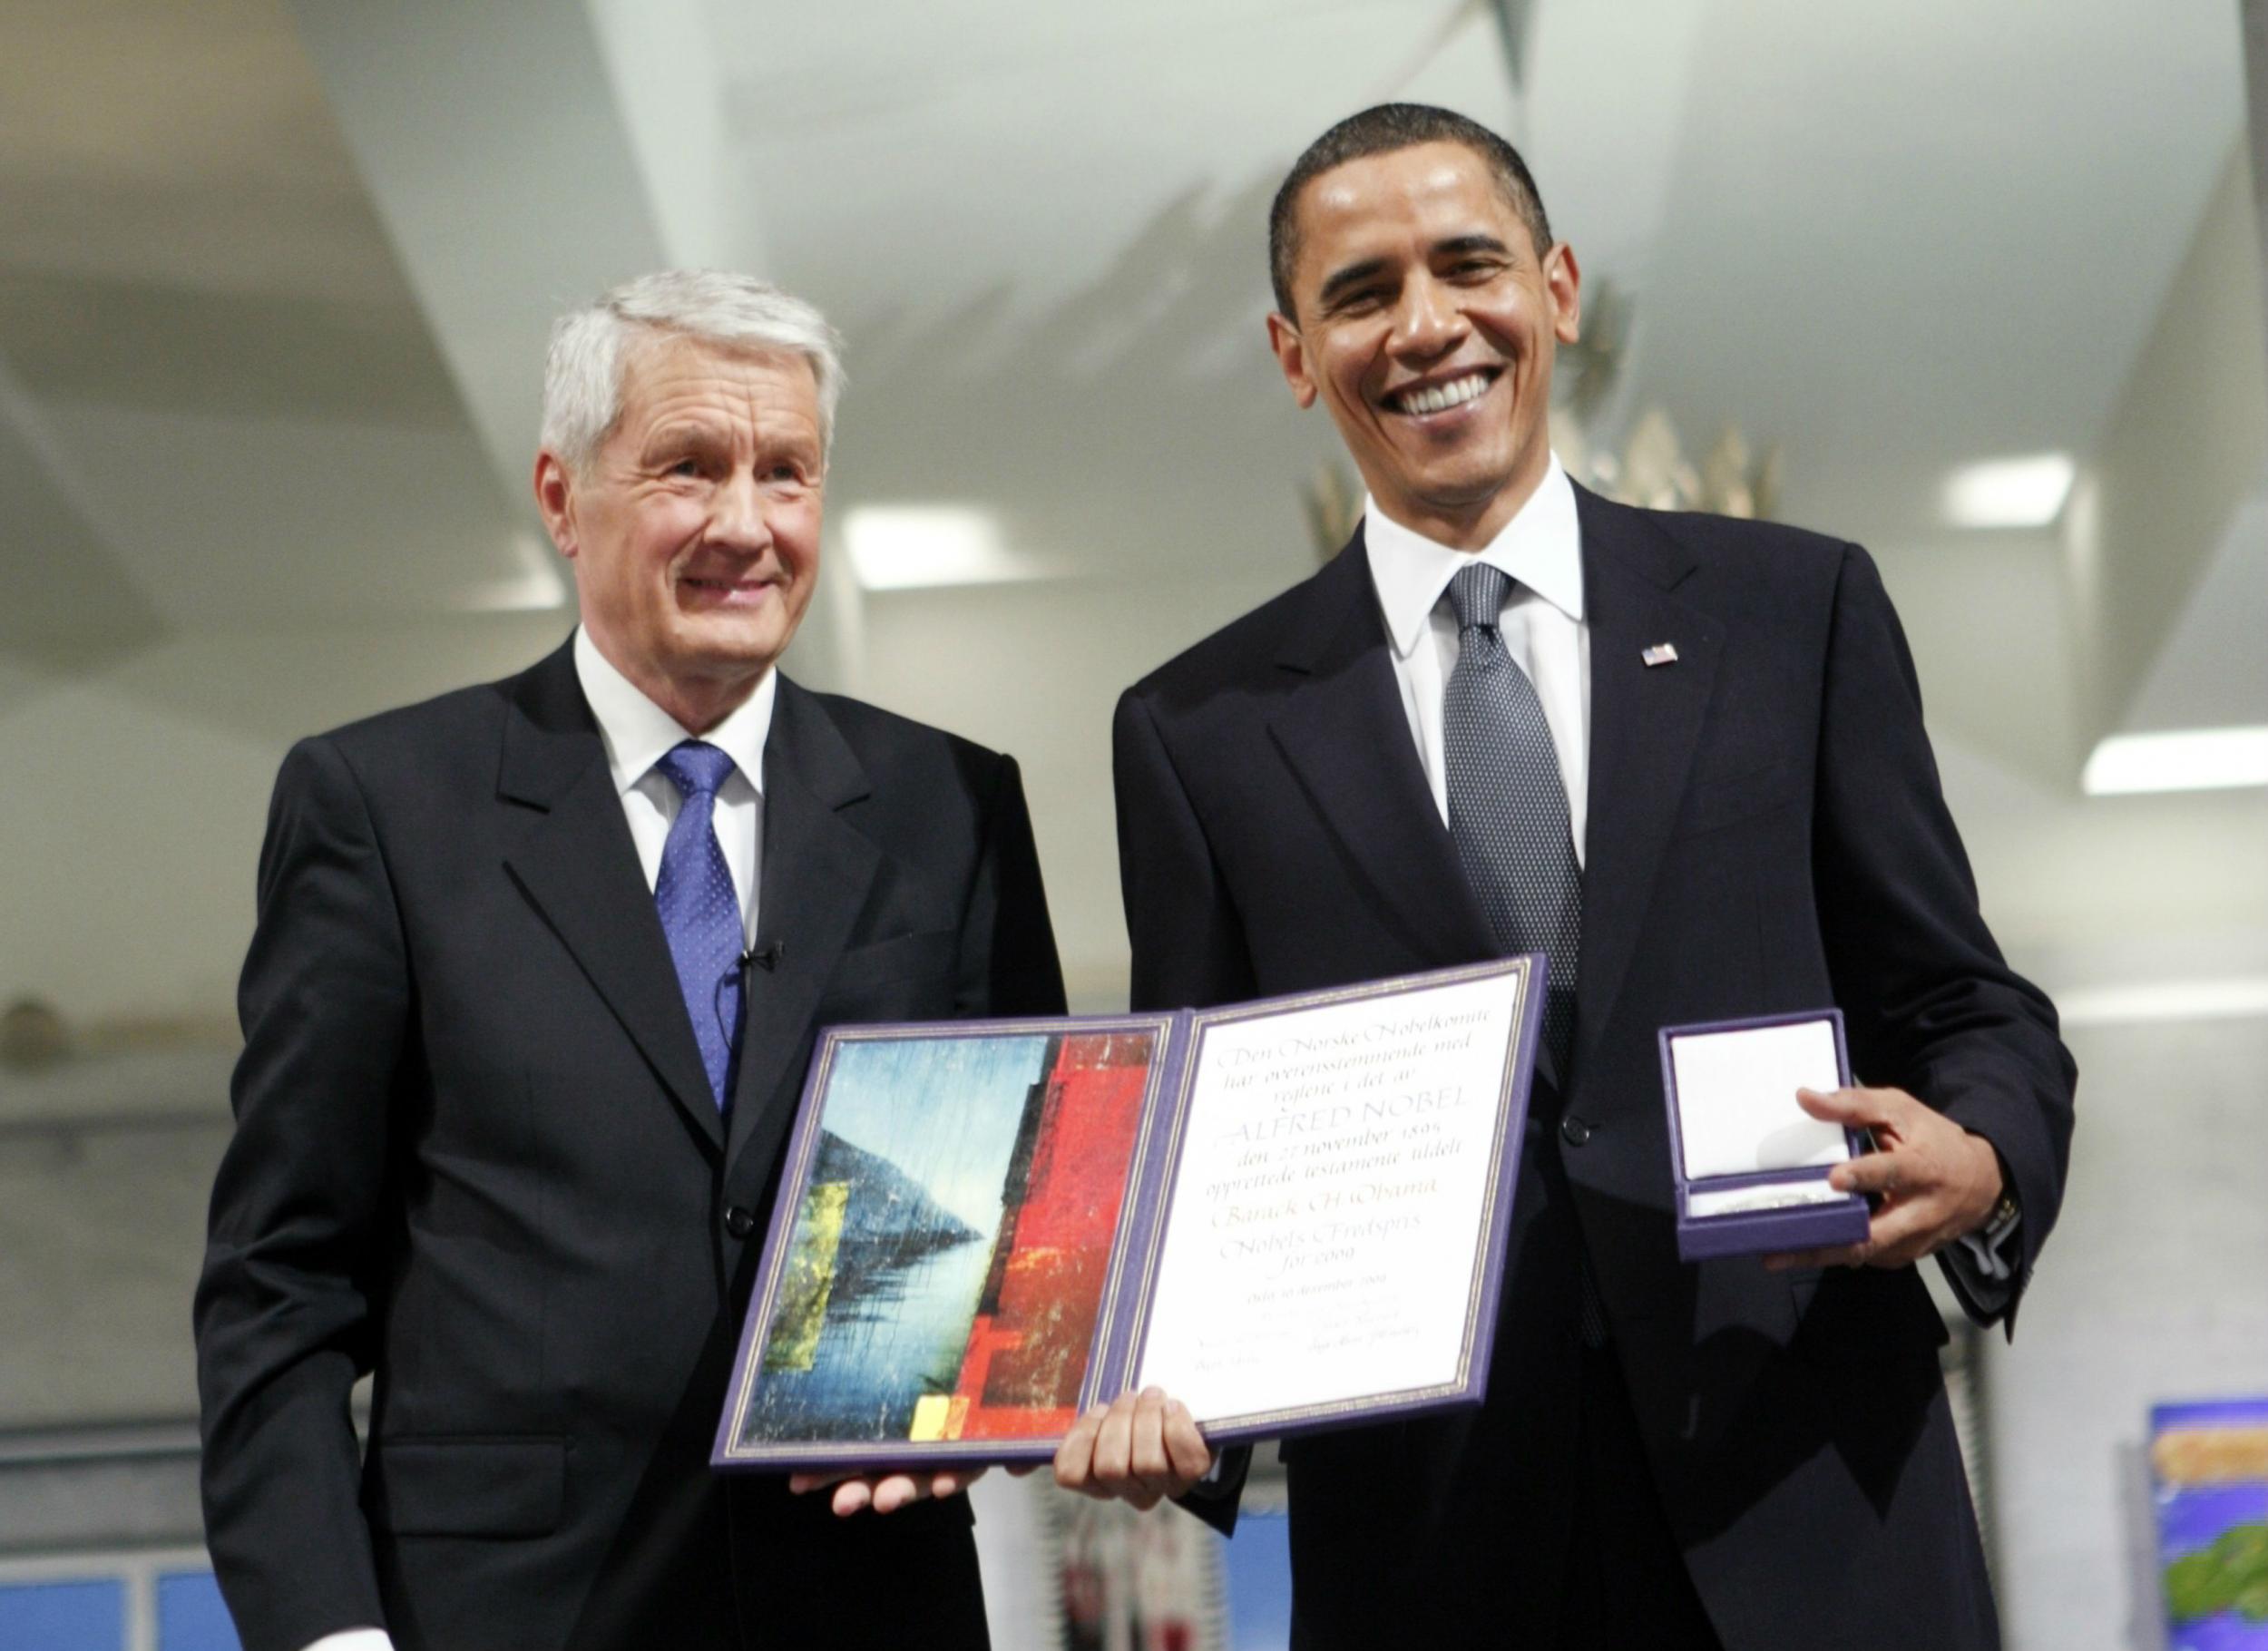 Barack Obama accepting his Nobel Peace Prize from Thorbjorn Jagland, chair of the Norwegian Nobel Committee, in December 2009